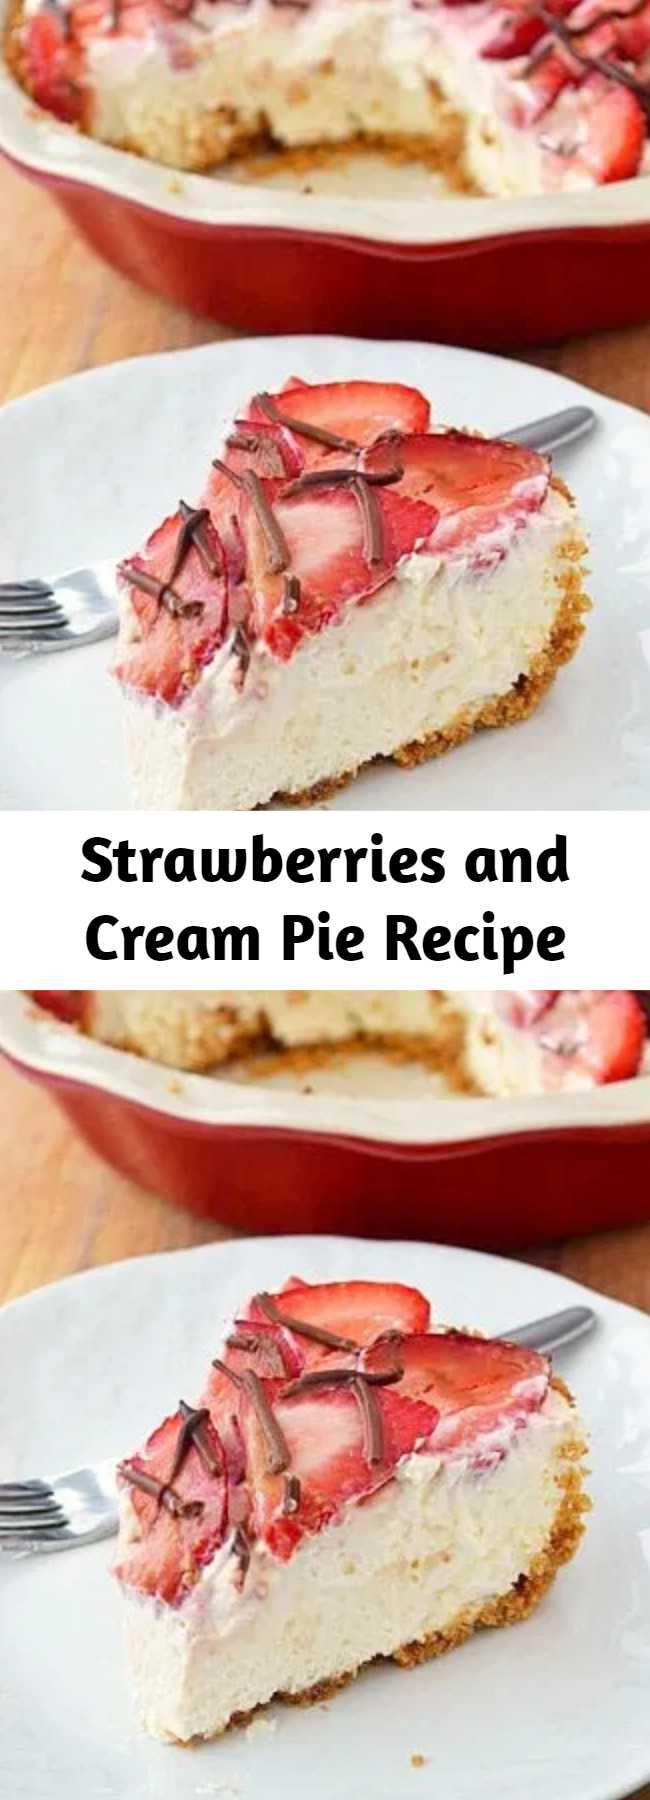 Strawberries and Cream Pie Recipe - A pie that’s so rich, so decadent, yet somehow so light that every bite just melts in your mouth. Mmmmmm.